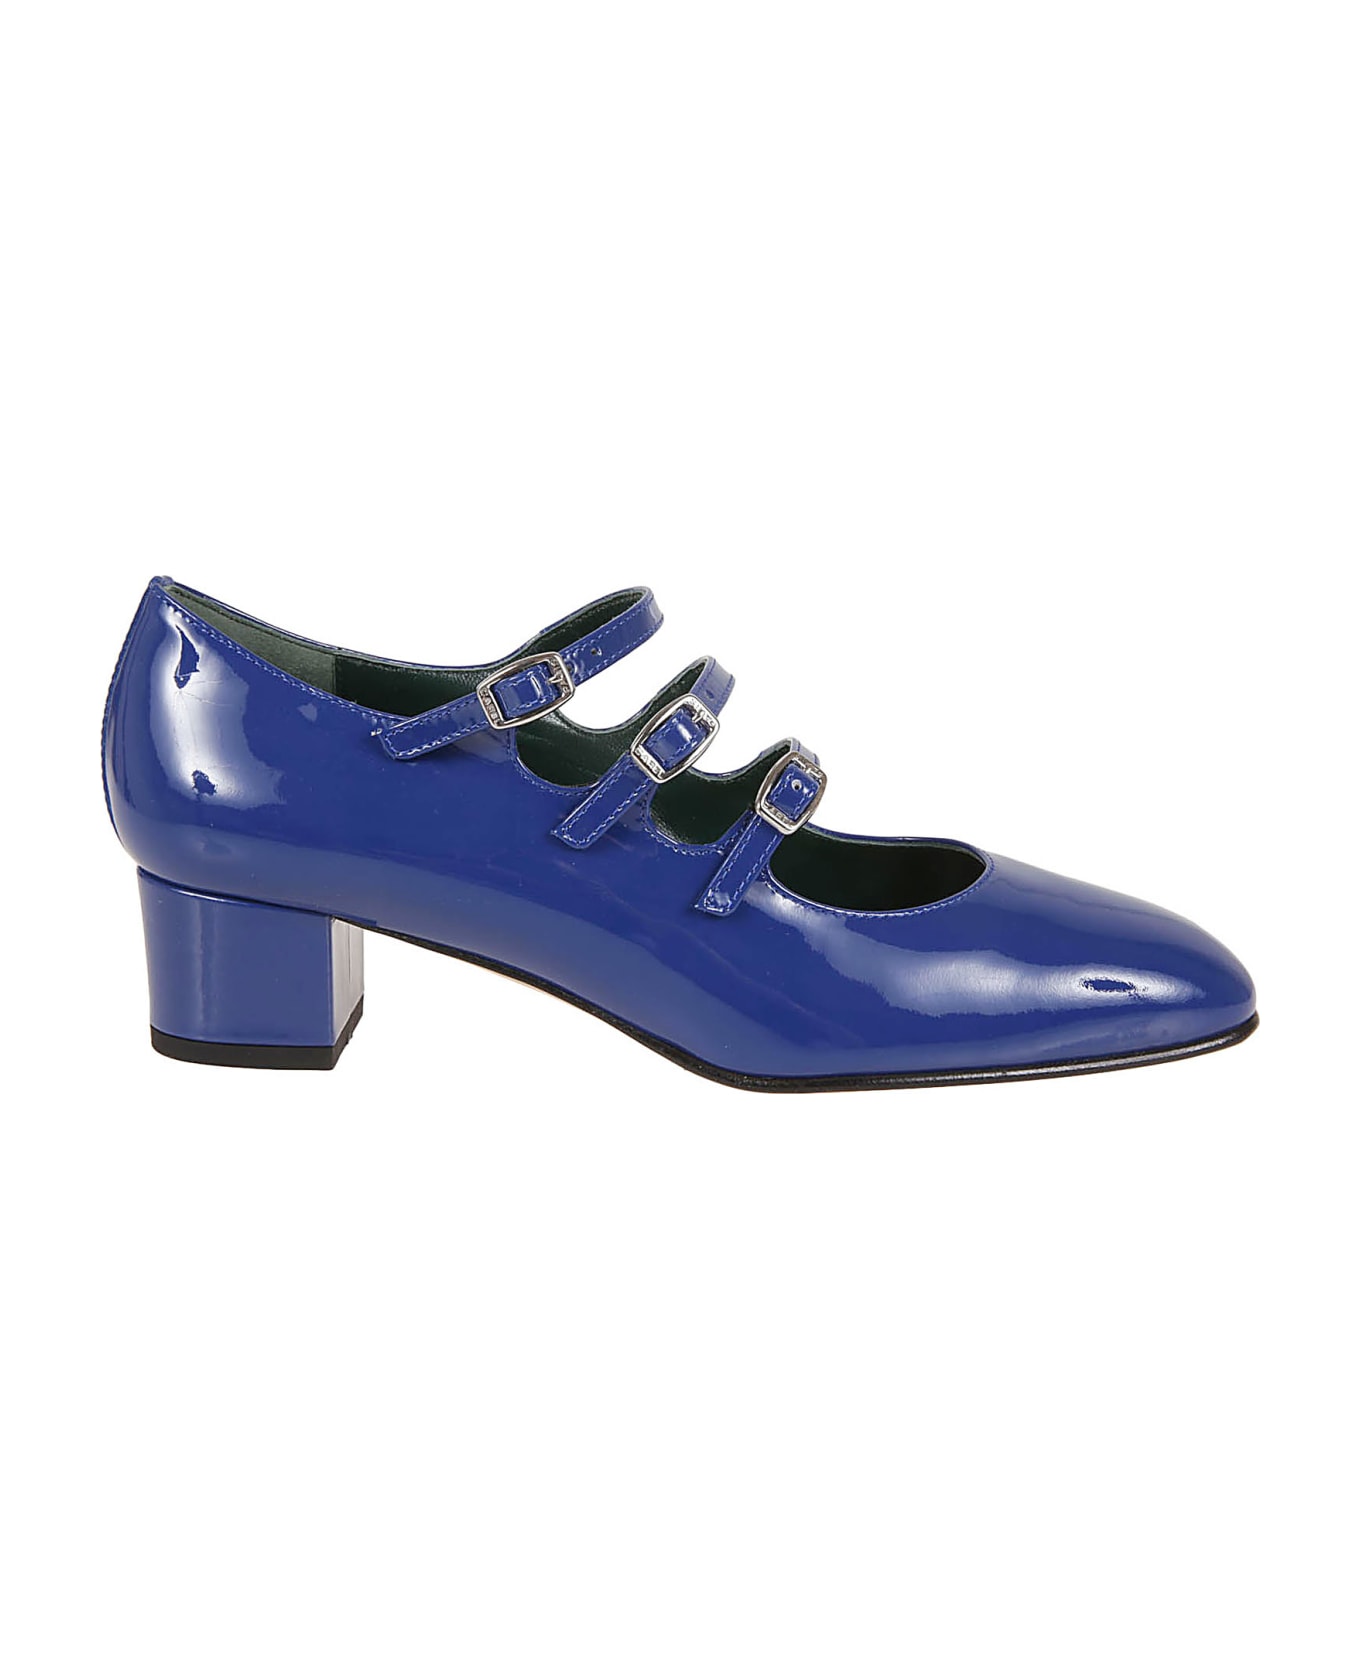 Carel Kina Patent Leather - Navy Patent Leather